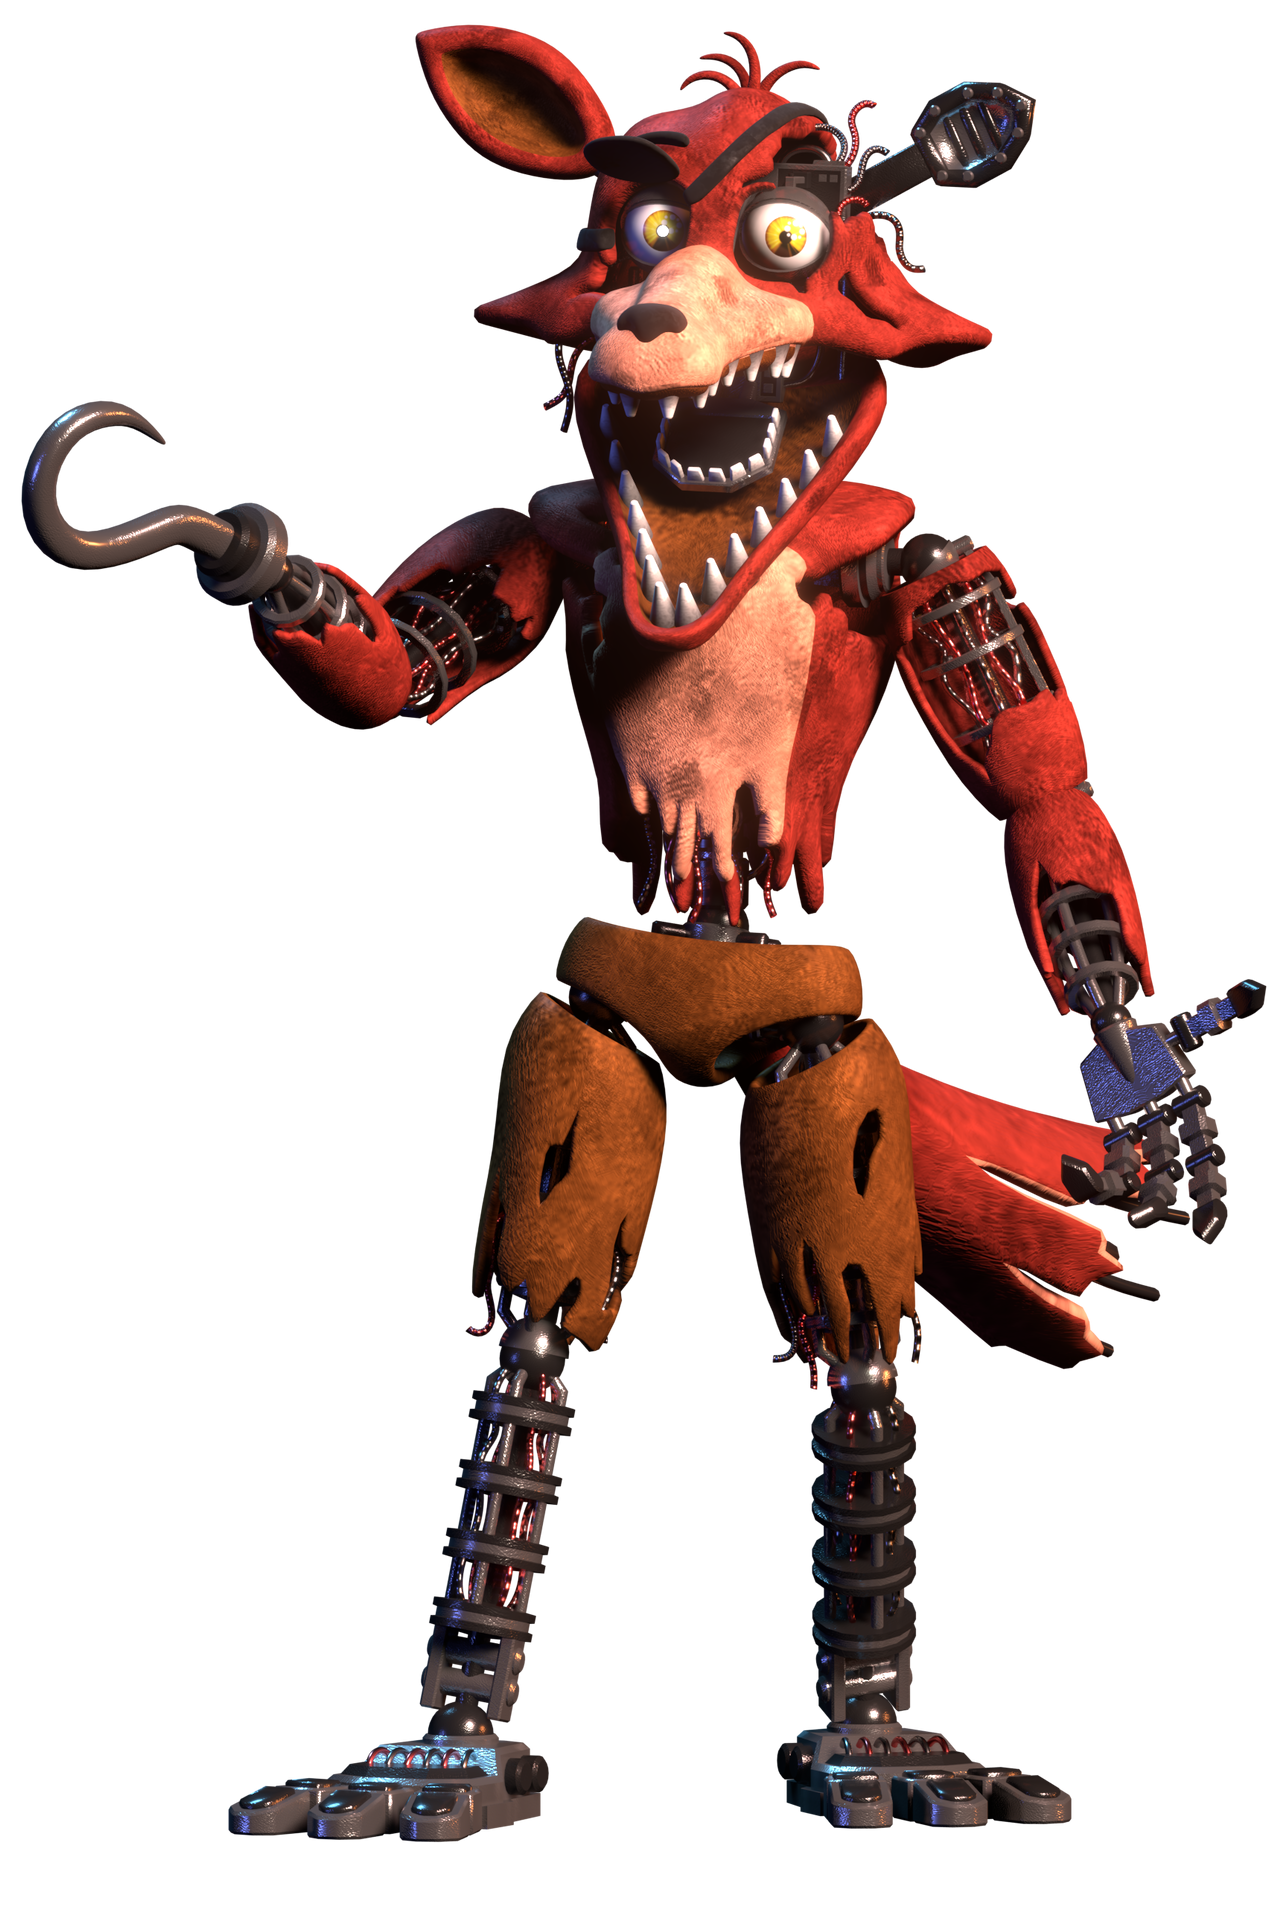 Withered Foxy! by RingsFox -- Fur Affinity [dot] net